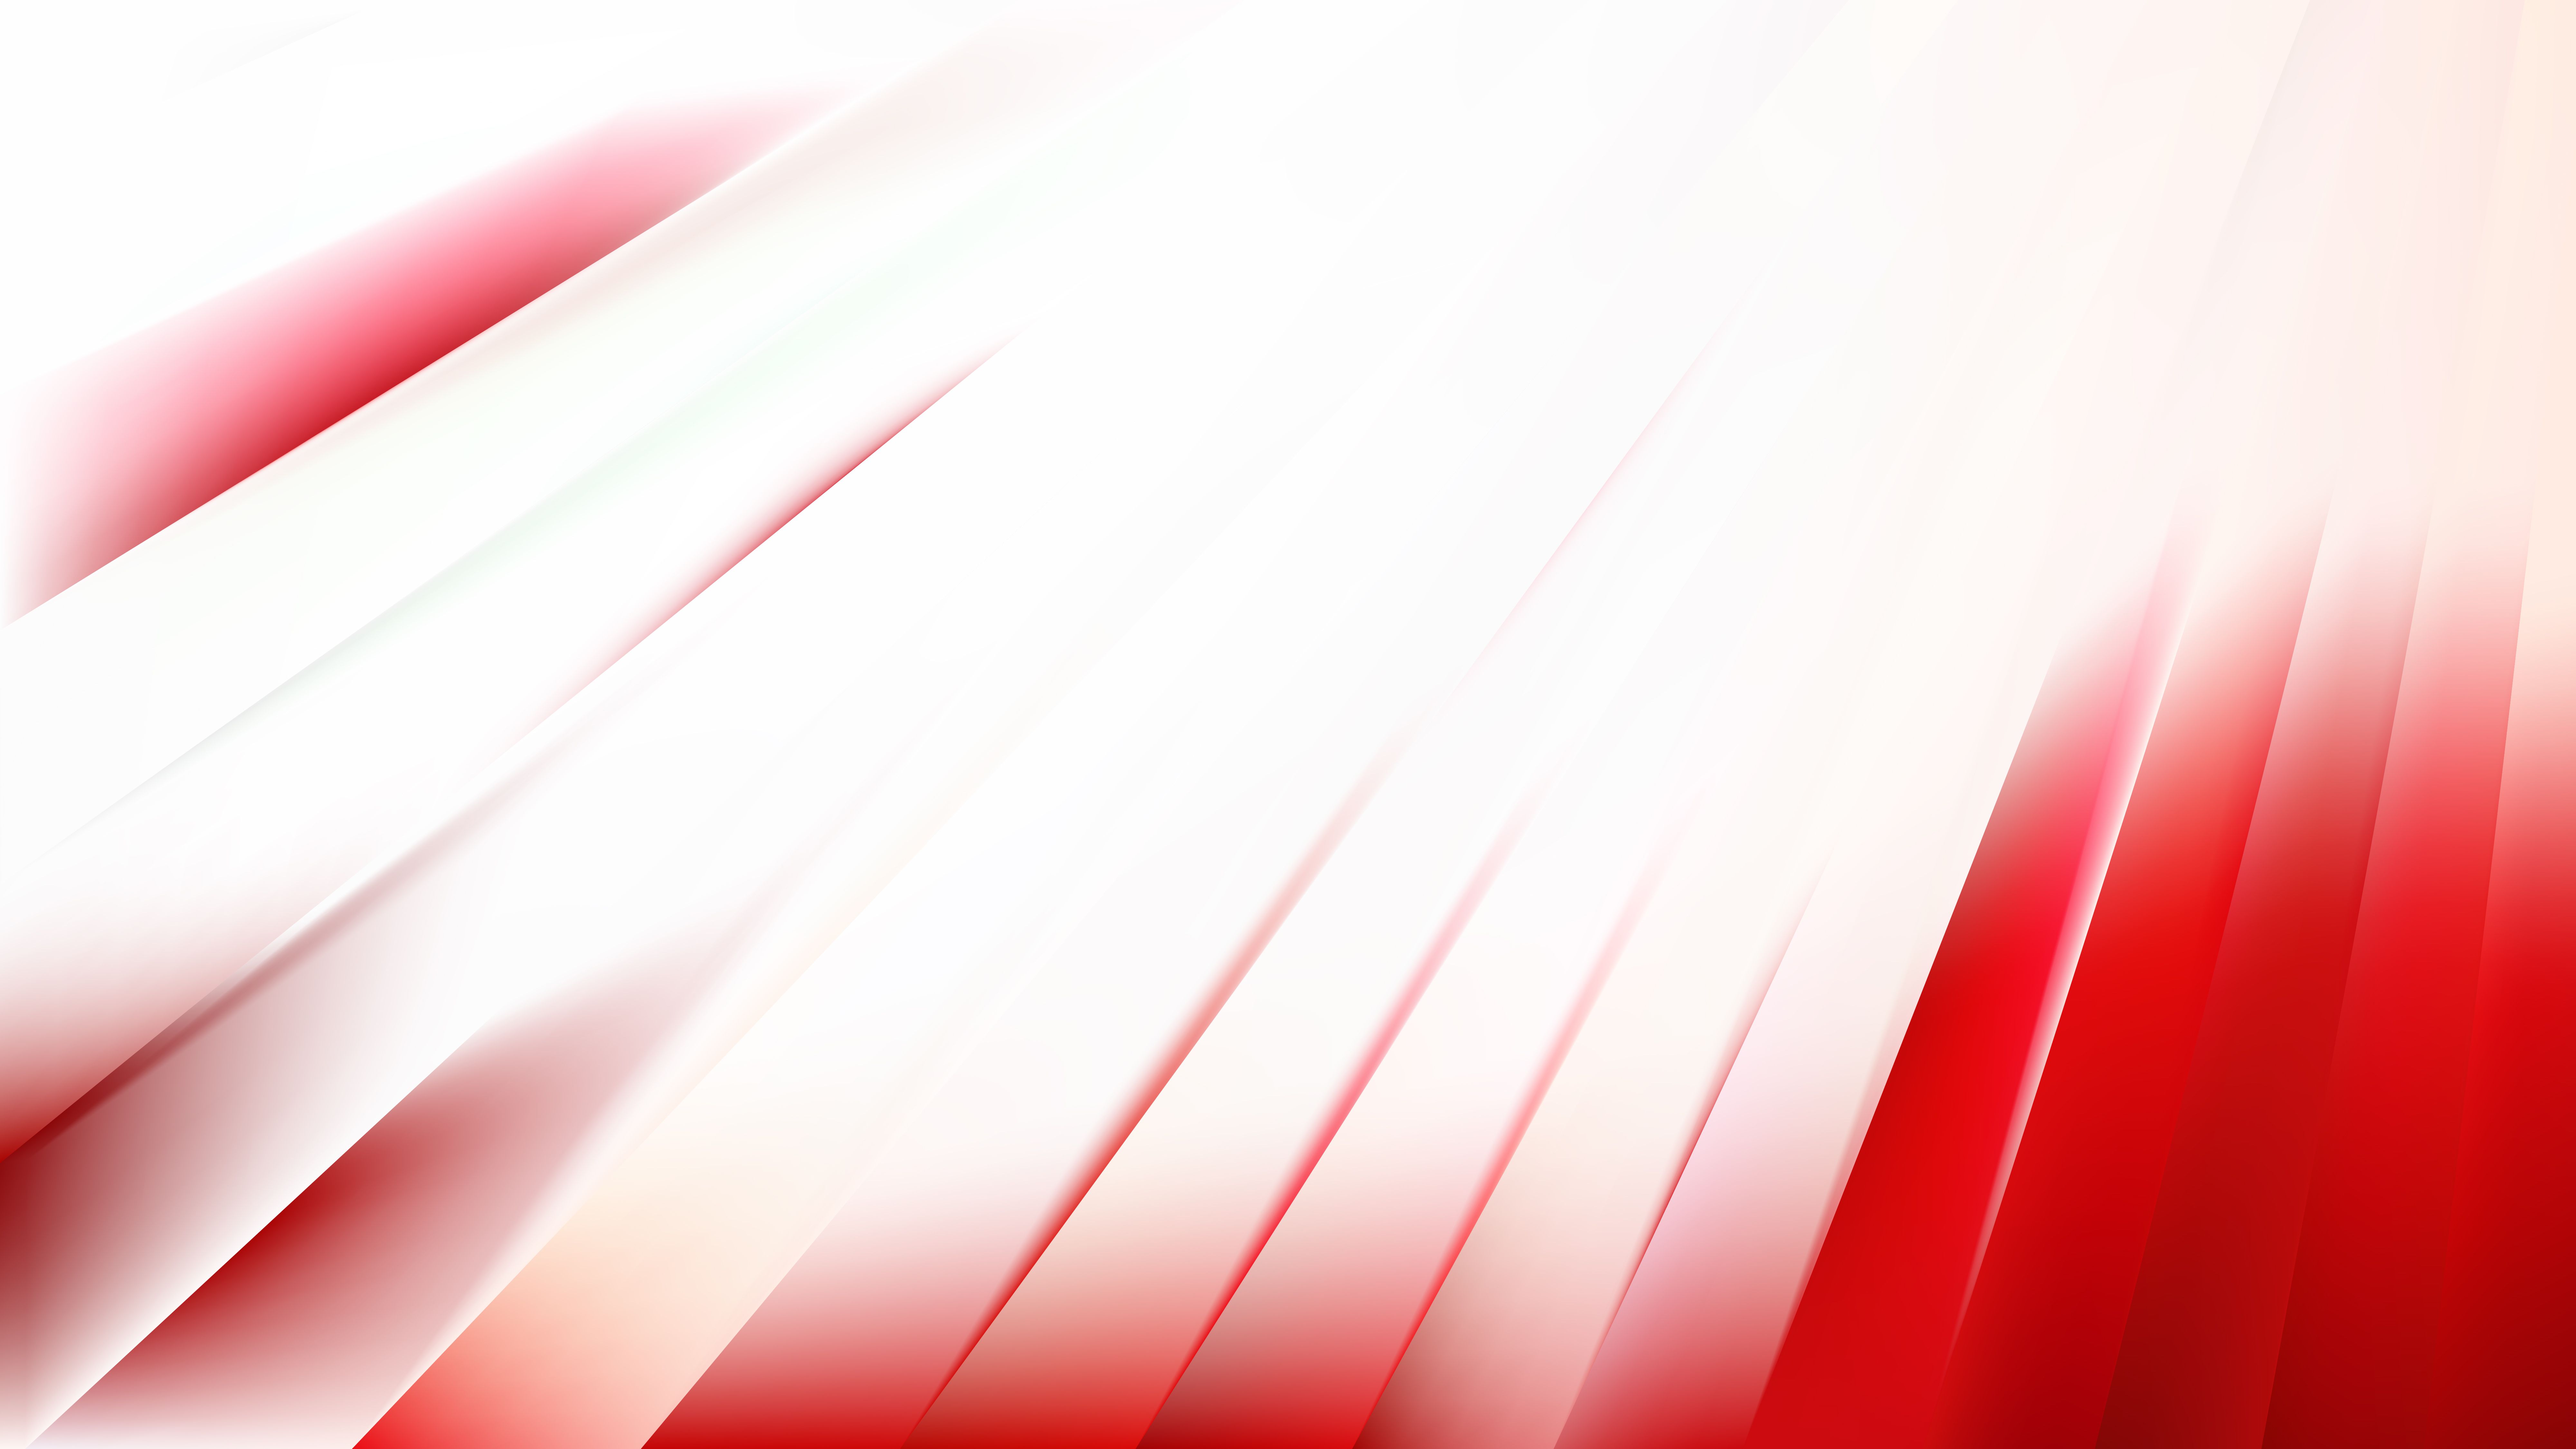 Free Abstract Red and White Diagonal Lines Background